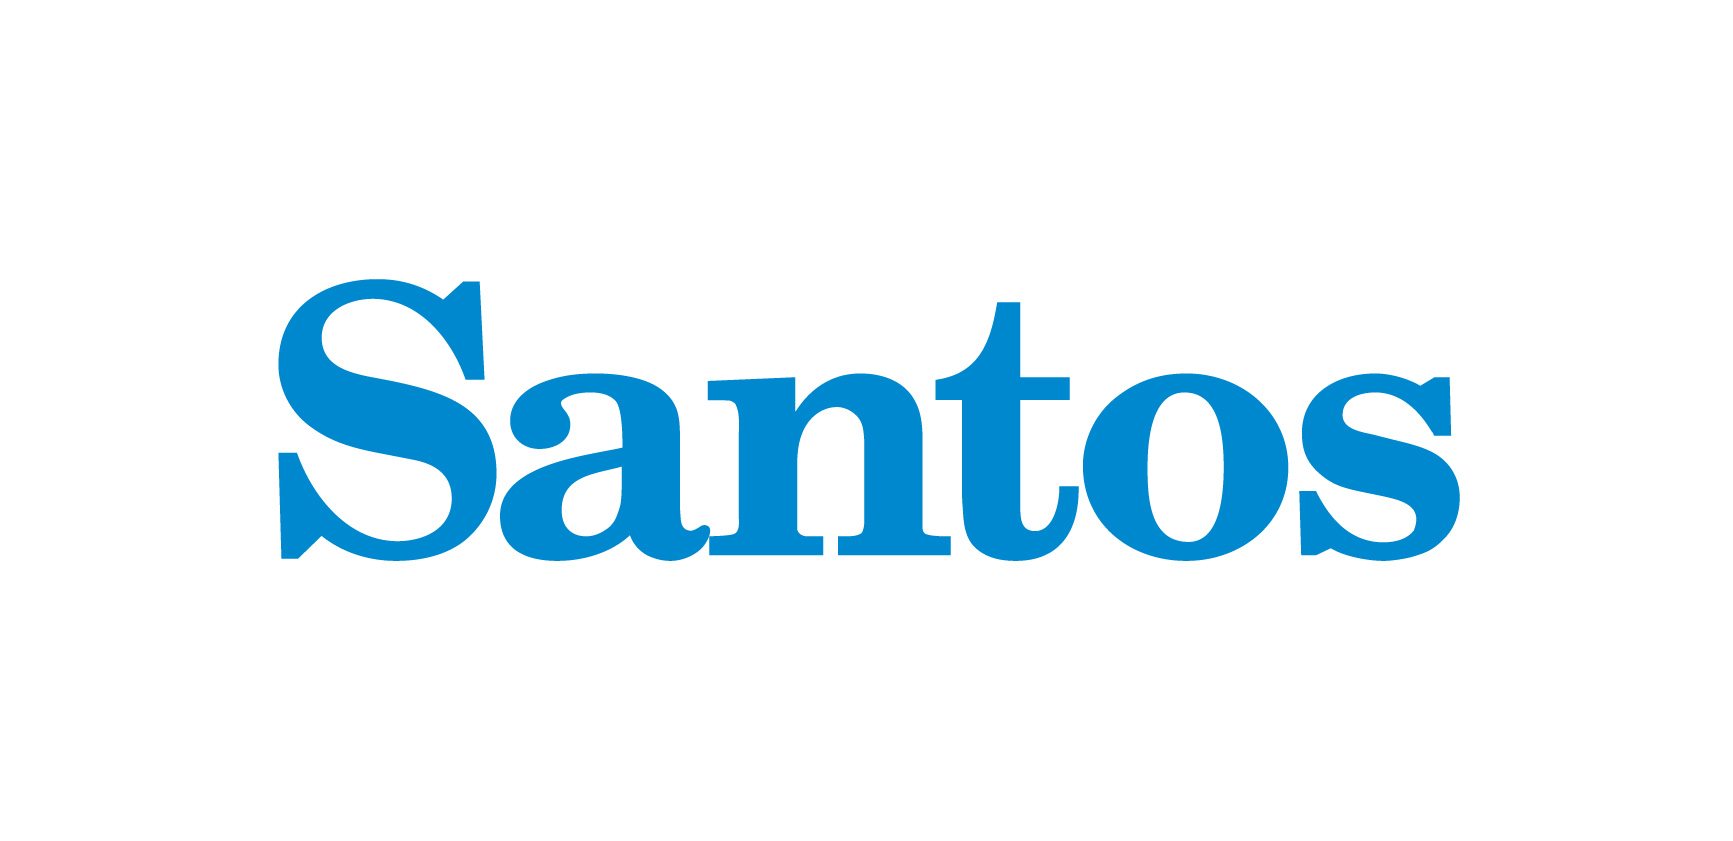 Santos to collaborate with Japan’s Toho Gas on producing carbon-neutral e-methane in the Cooper Basin